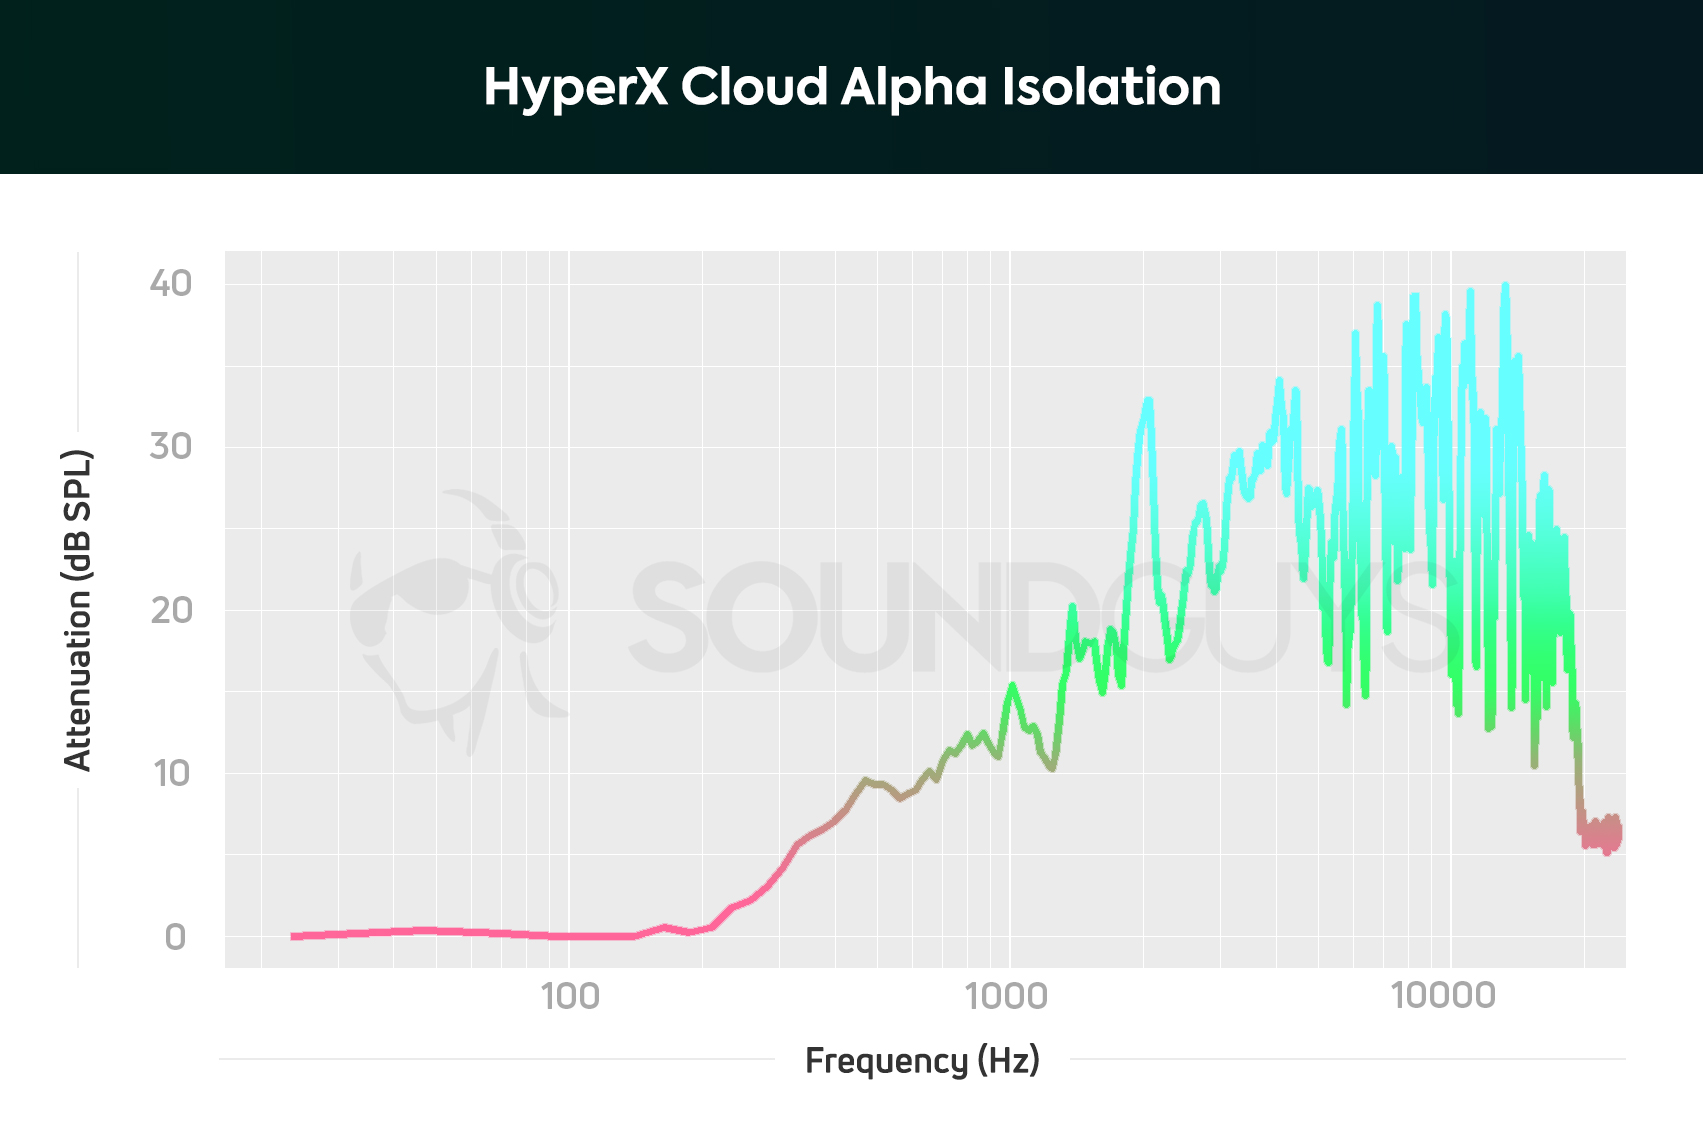 An isolation chart for the HyperX Cloud Alpha gaming headset.